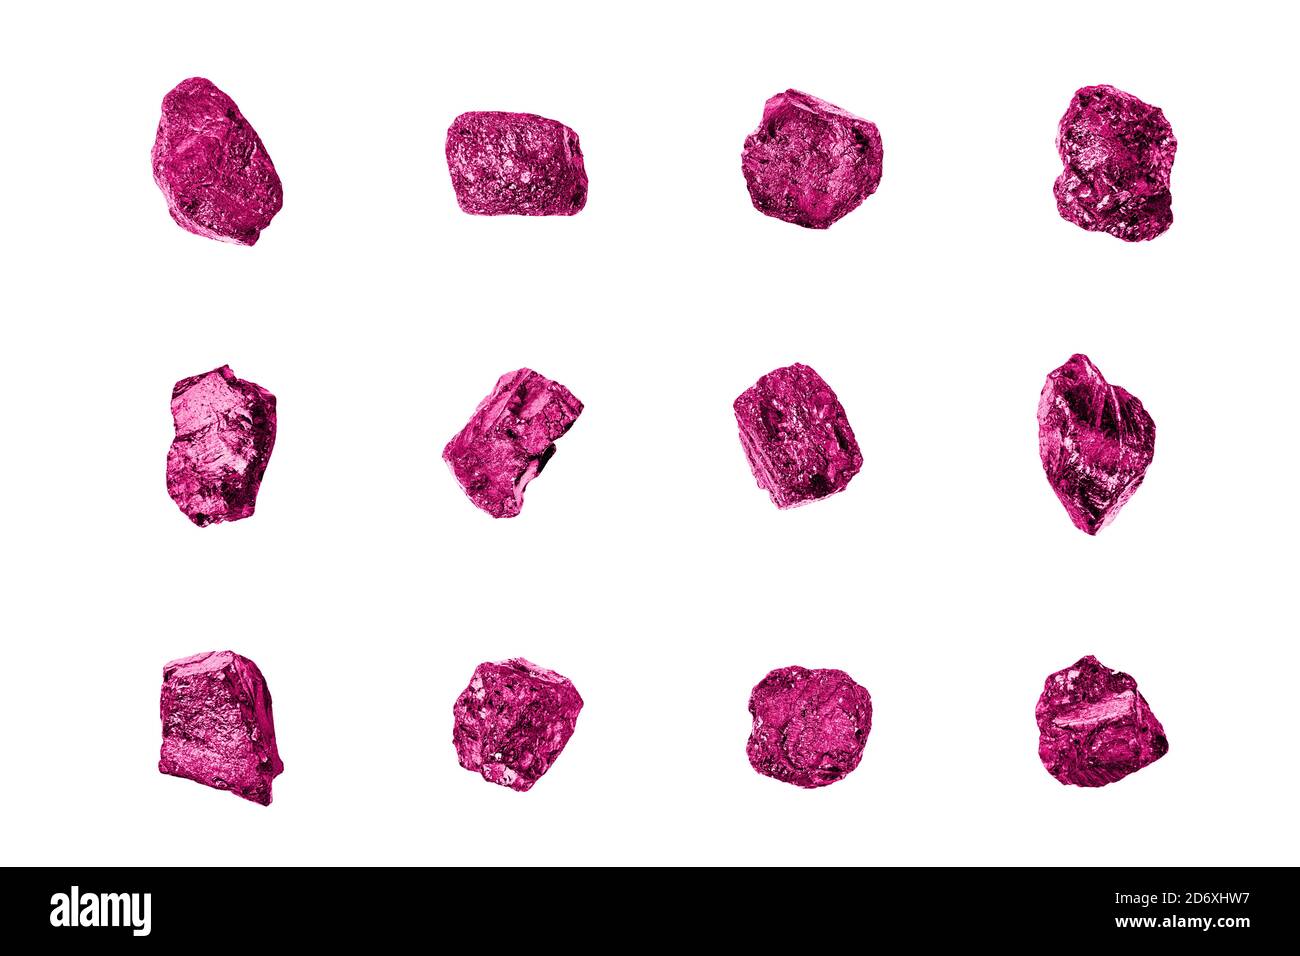 Pink gem stones white background isolated close up, raw gemstones, rocks, nuggets, mineral samples, amethyst, sapphire, topaz, spinel, tourmaline Stock Photo